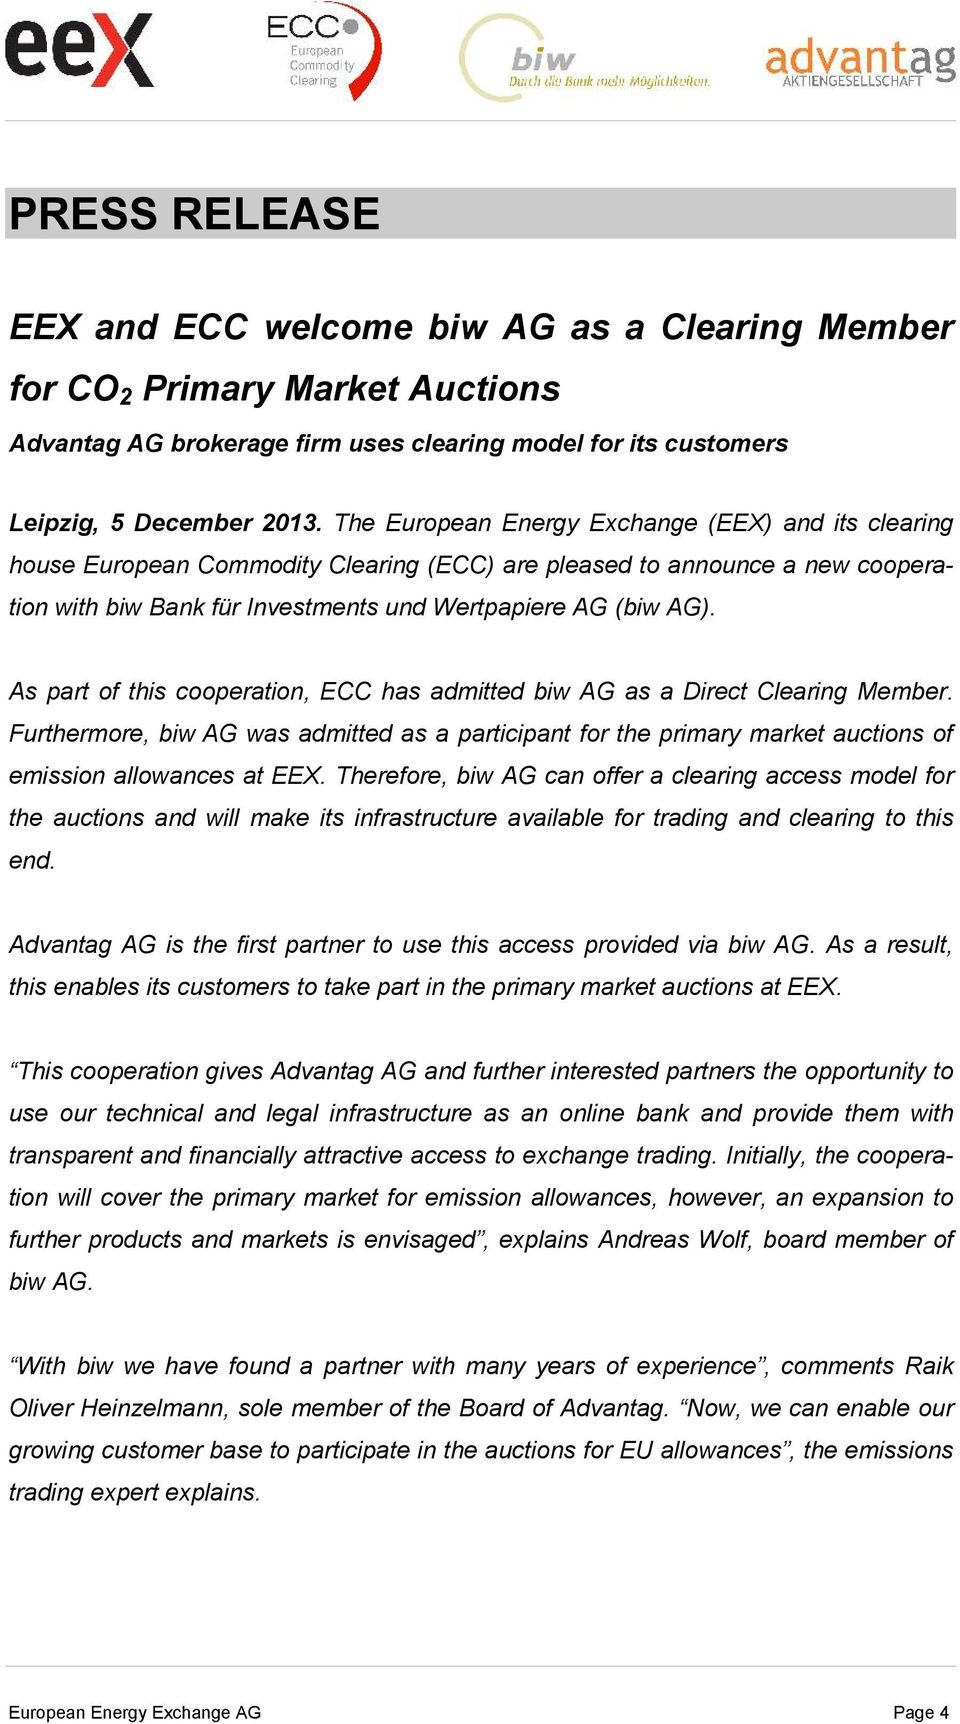 As part of this cooperation, ECC has admitted biw AG as a Direct Clearing Member. Furthermore, biw AG was admitted as a participant for the primary market auctions of emission allowances at EEX.